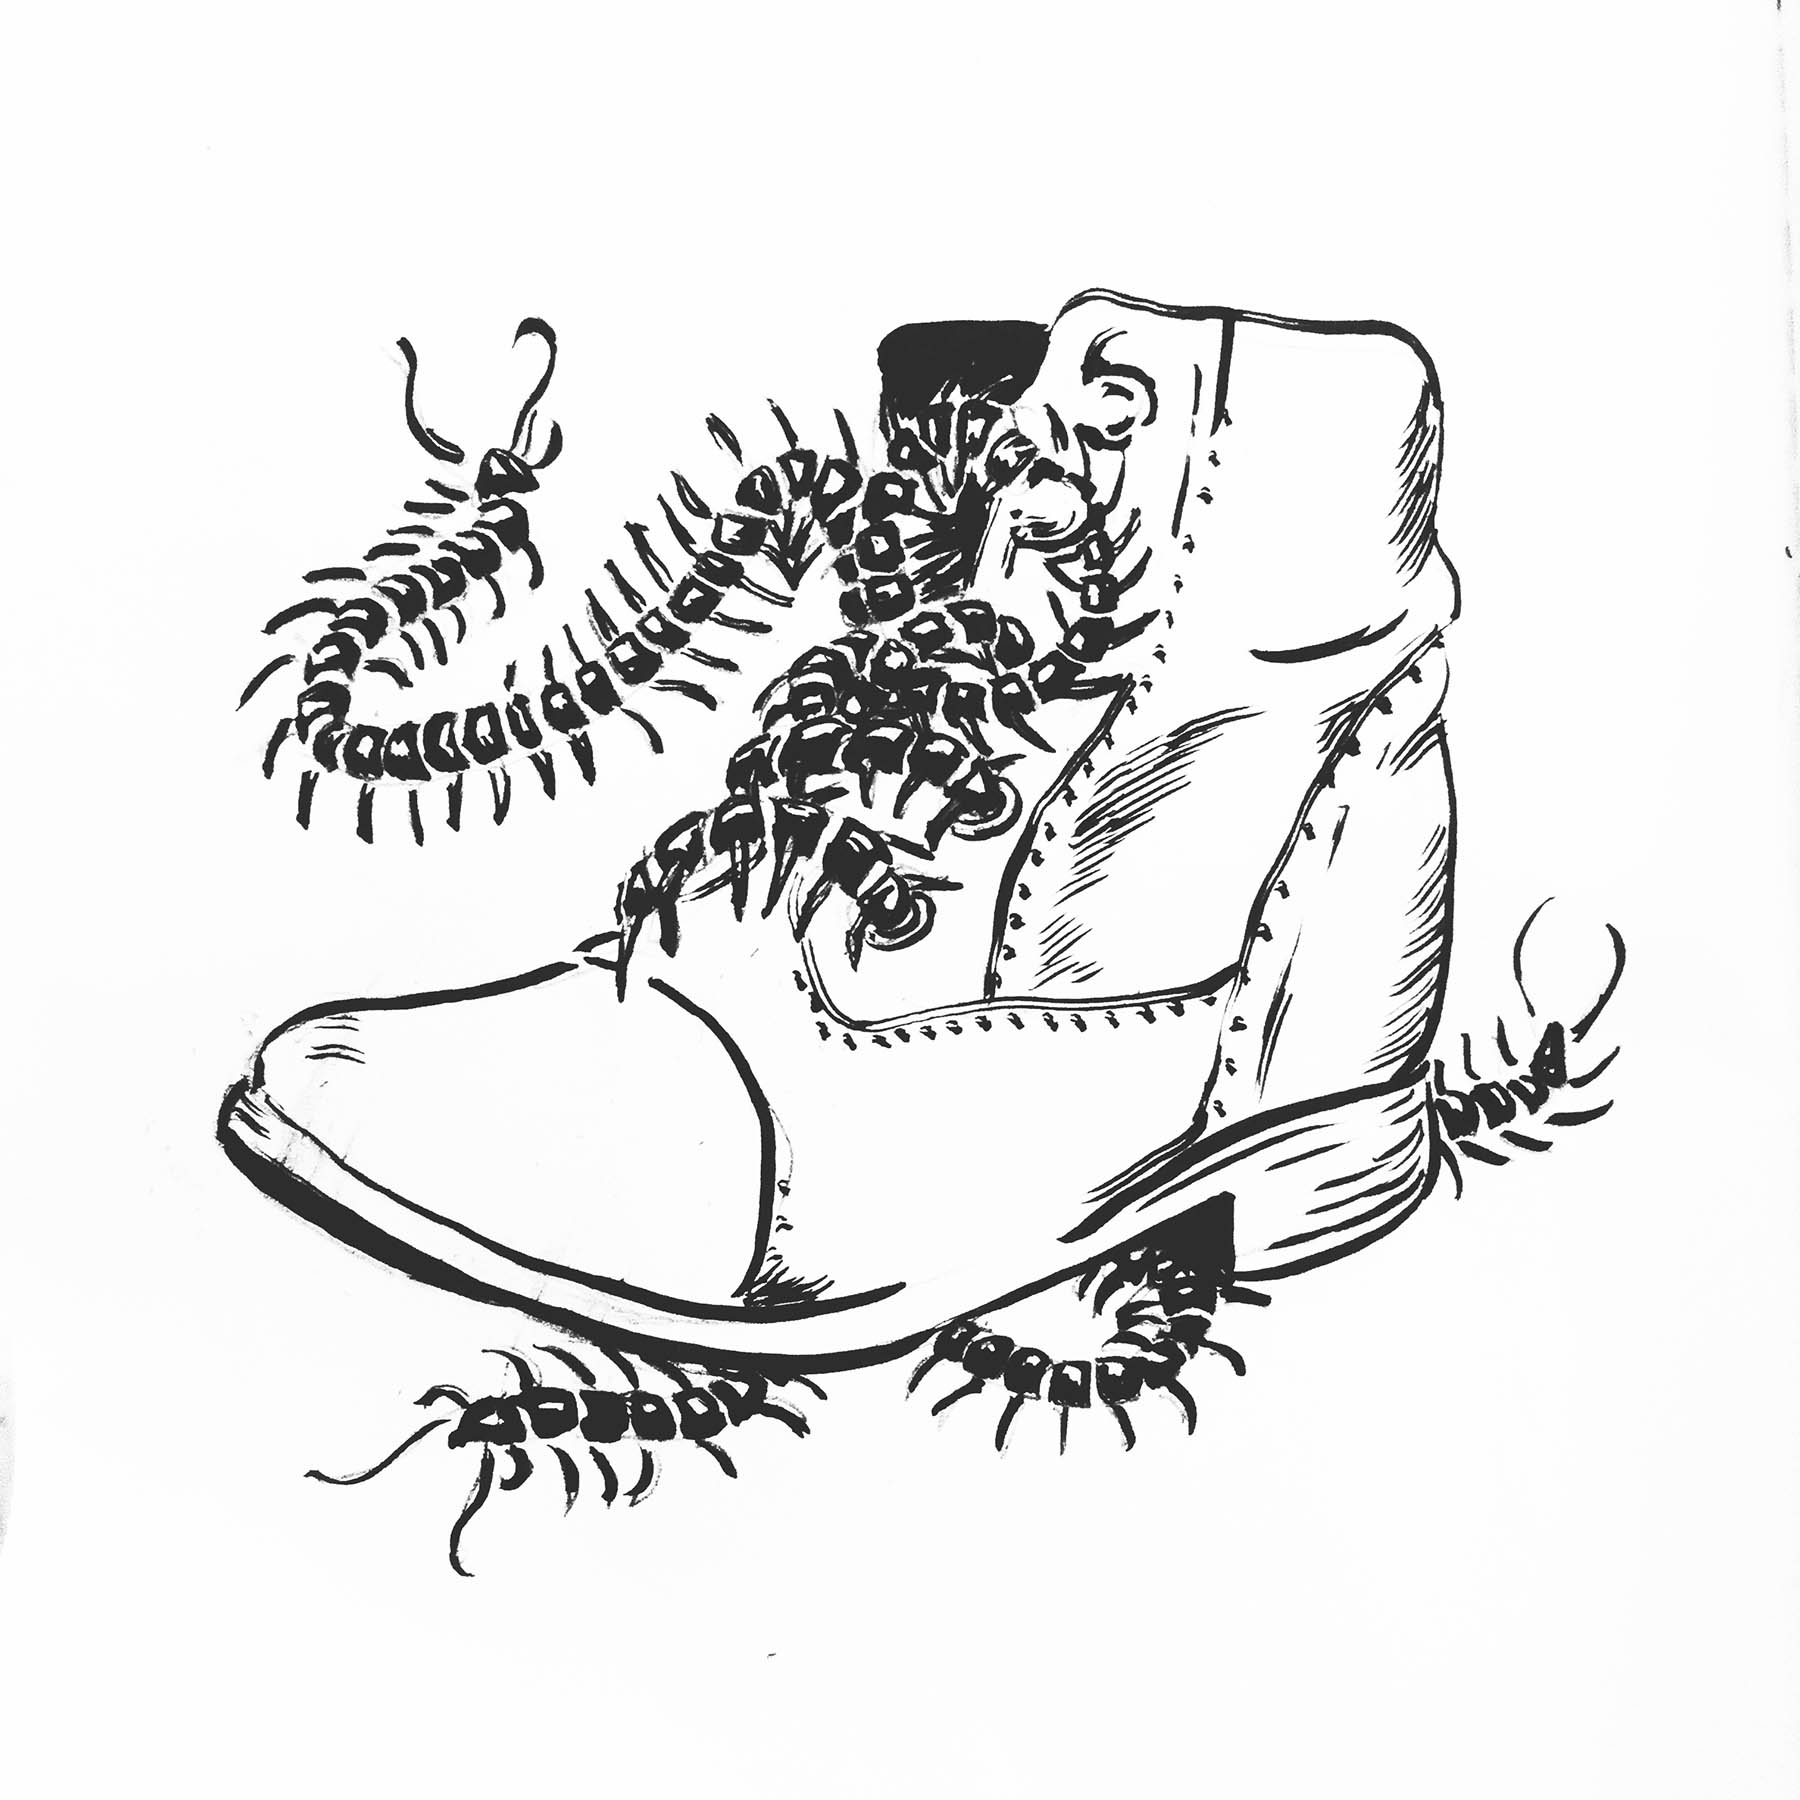 Illustration of a boot with centipede laces.